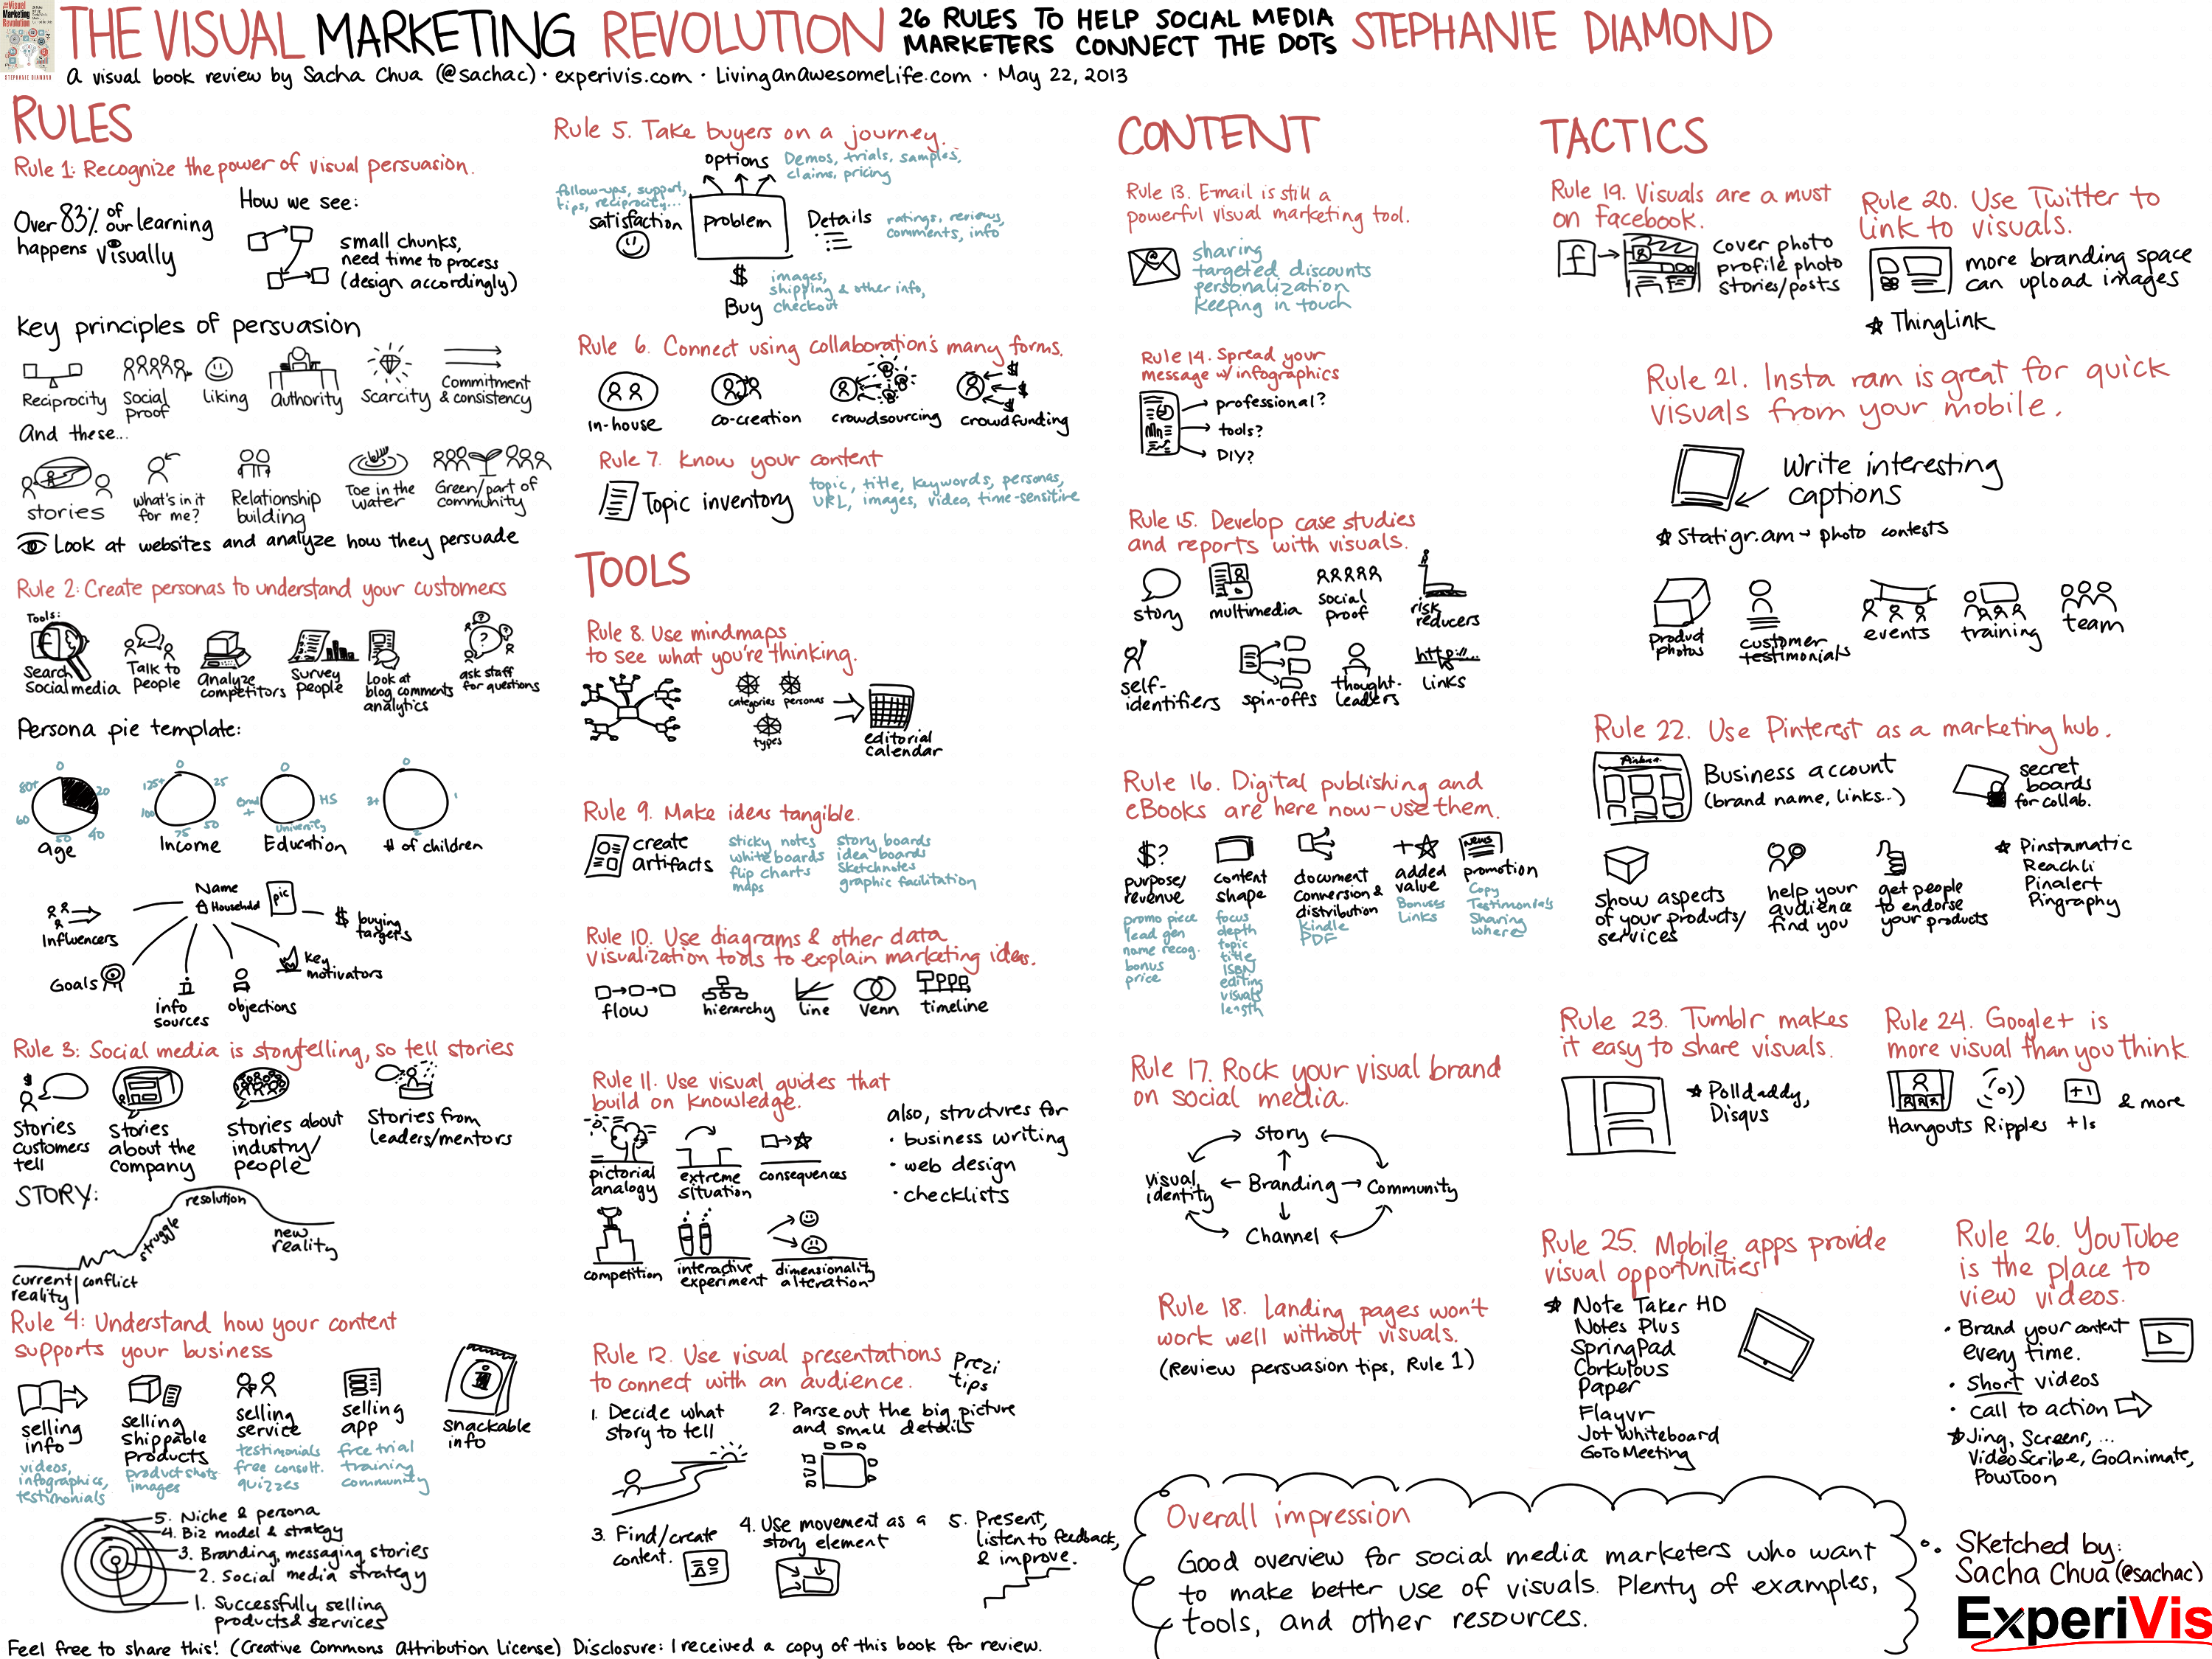 2013-05-22 Sketched Book - The Visual Marketing Revolution - 26 Rules to Help Social Media Marketers Connect the Dots - Stephanie Diamond.png